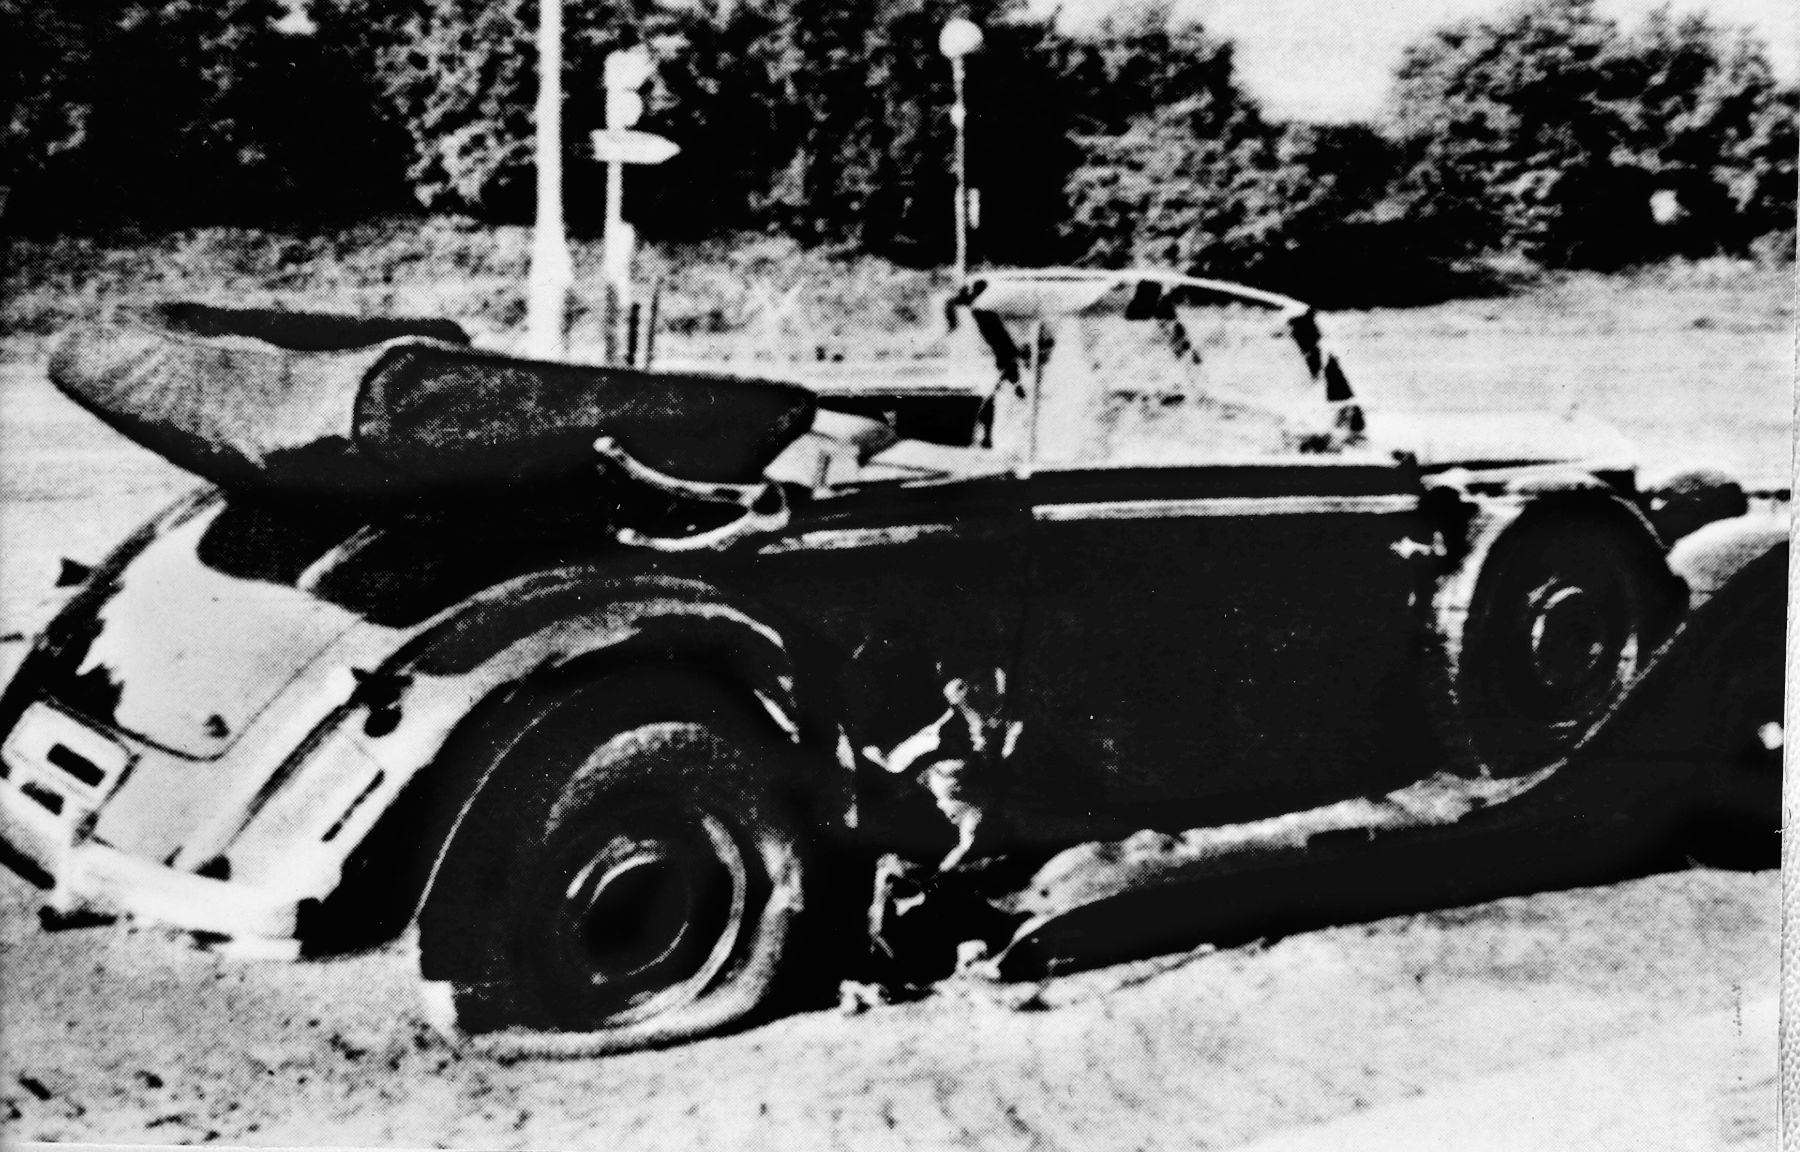 Heydrich’s Mercedes after the attack. The driver’s window was shattered, and a hole was blown in the side behind the door. The passenger door was also blown off in the attack and has been replaced for the photo.